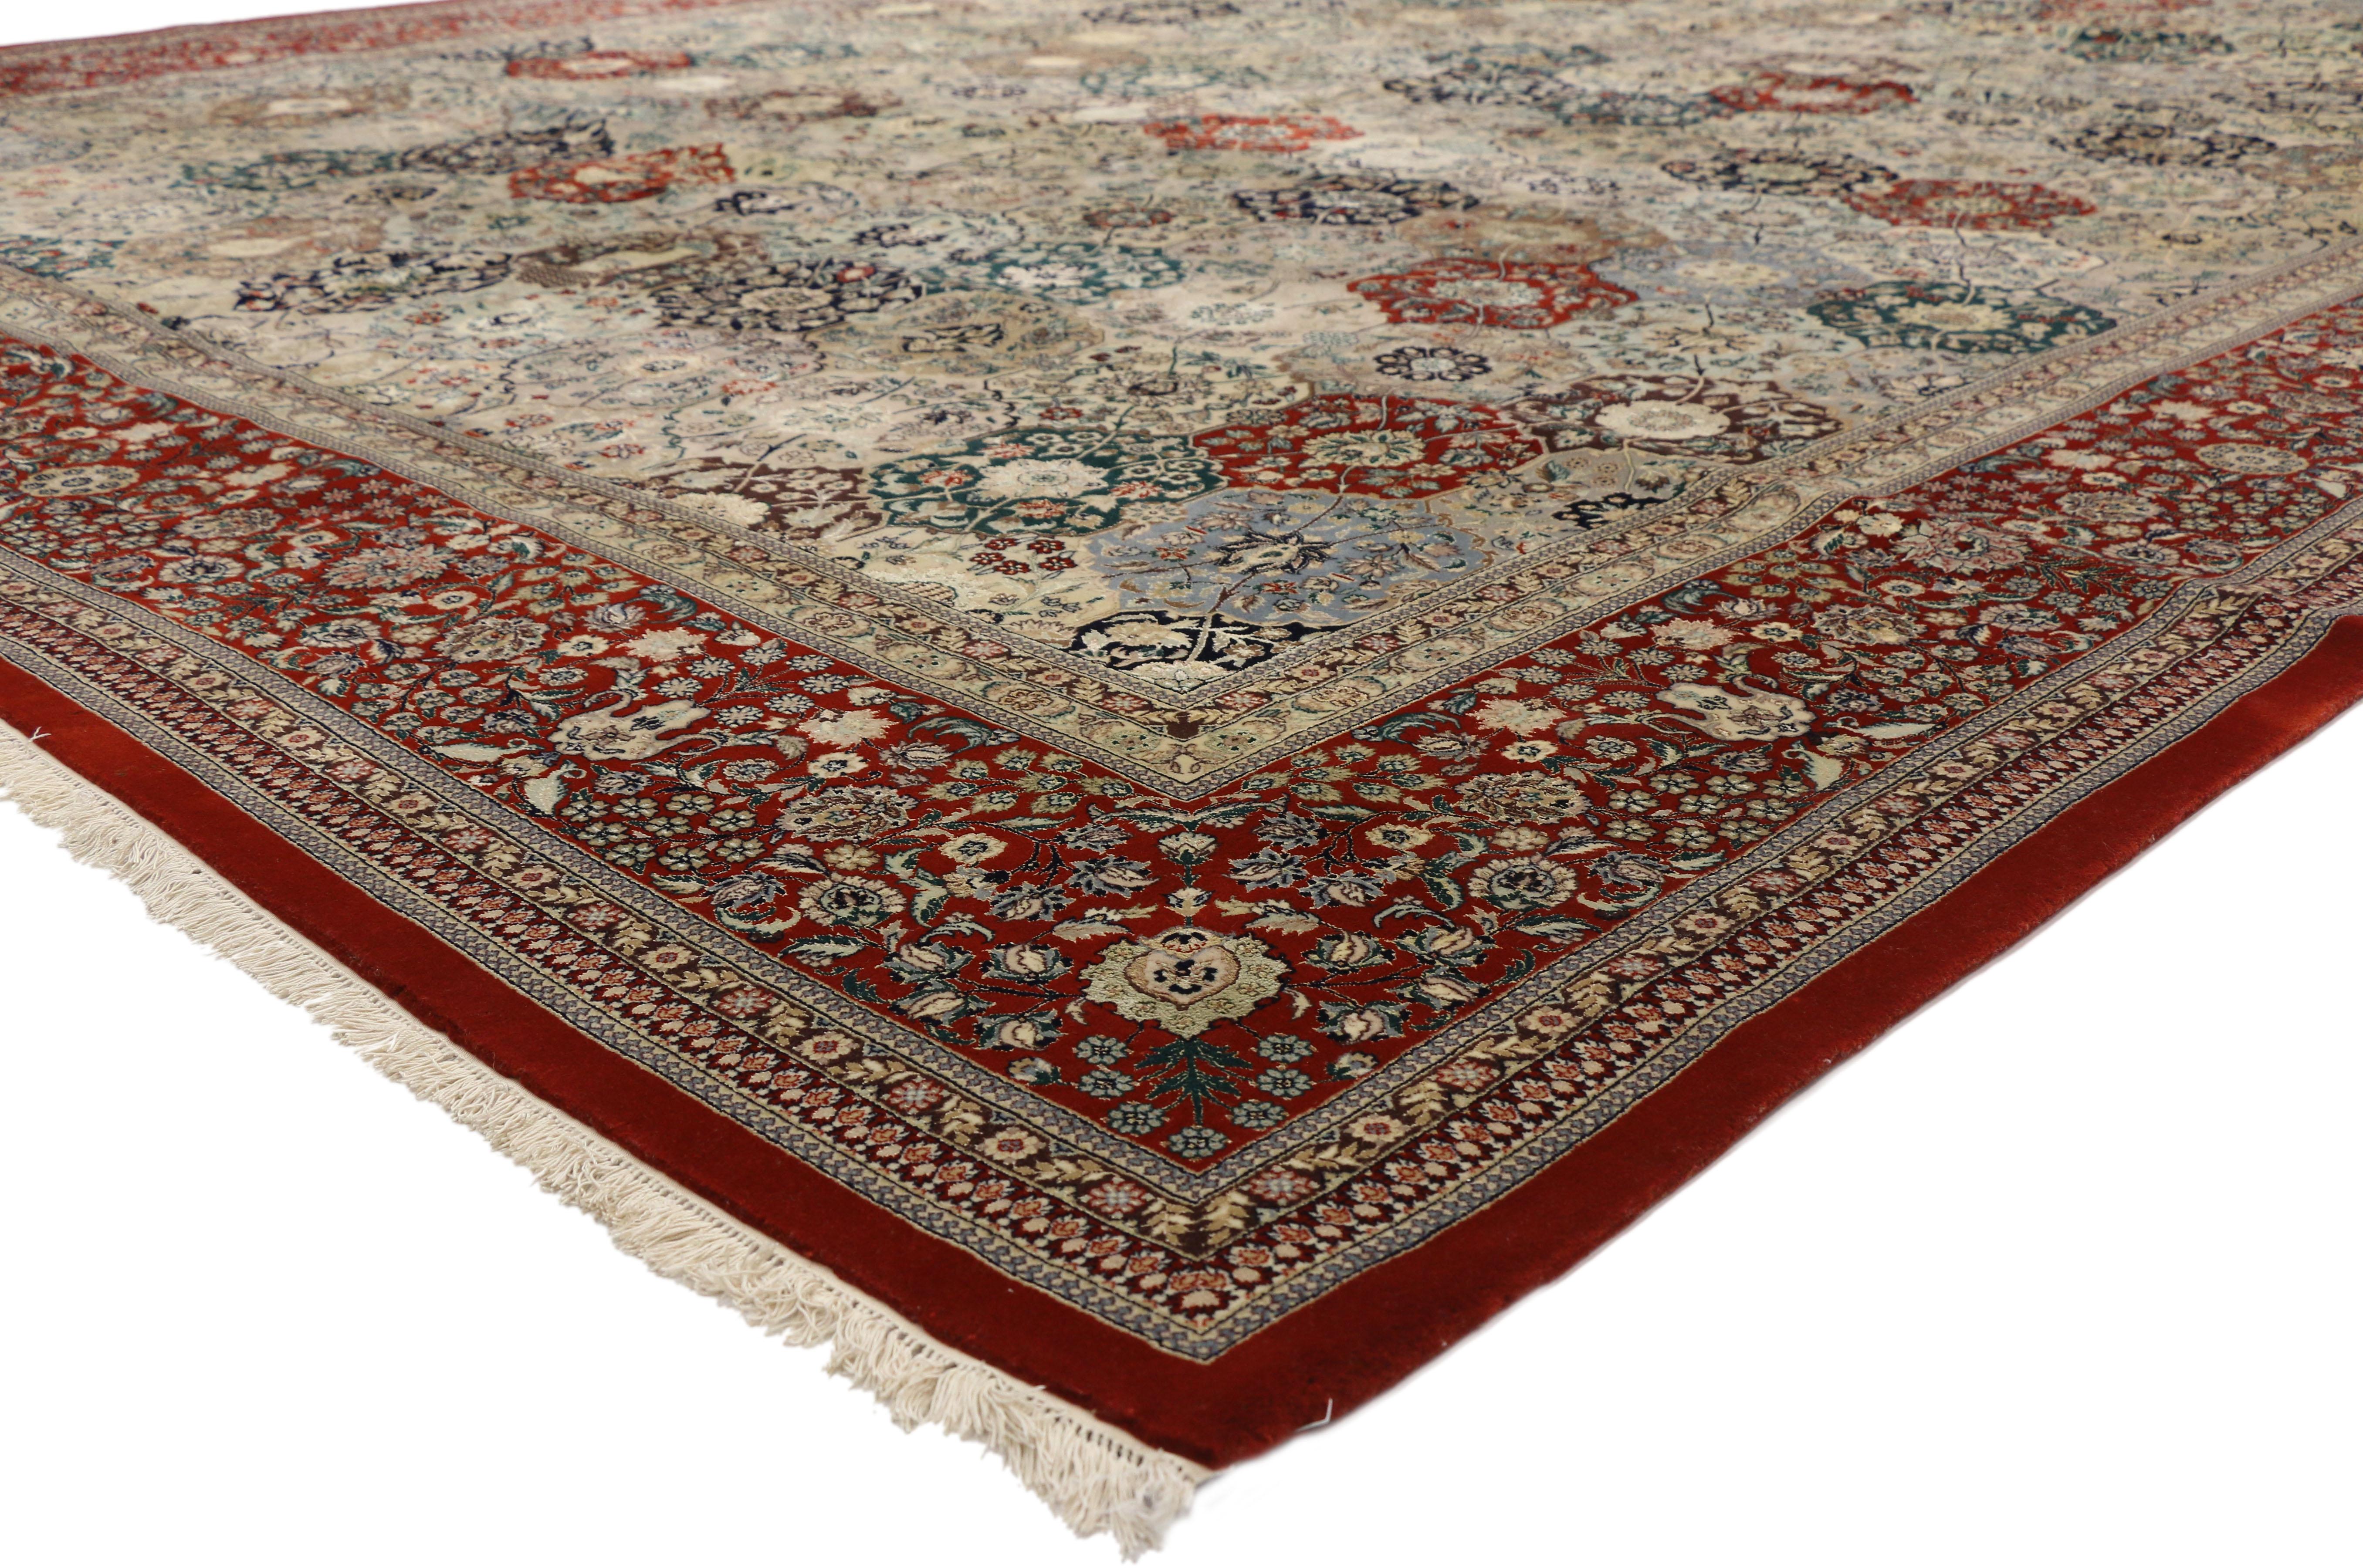 74848 Vintage Wool and Silk Chinese Tabriz Rug, 11’01 x 16’00. Chinese Tabriz rugs are intricately designed carpets that draw inspiration from the traditional Tabriz rugs of Iran. They are typically handcrafted in China, often in regions known for